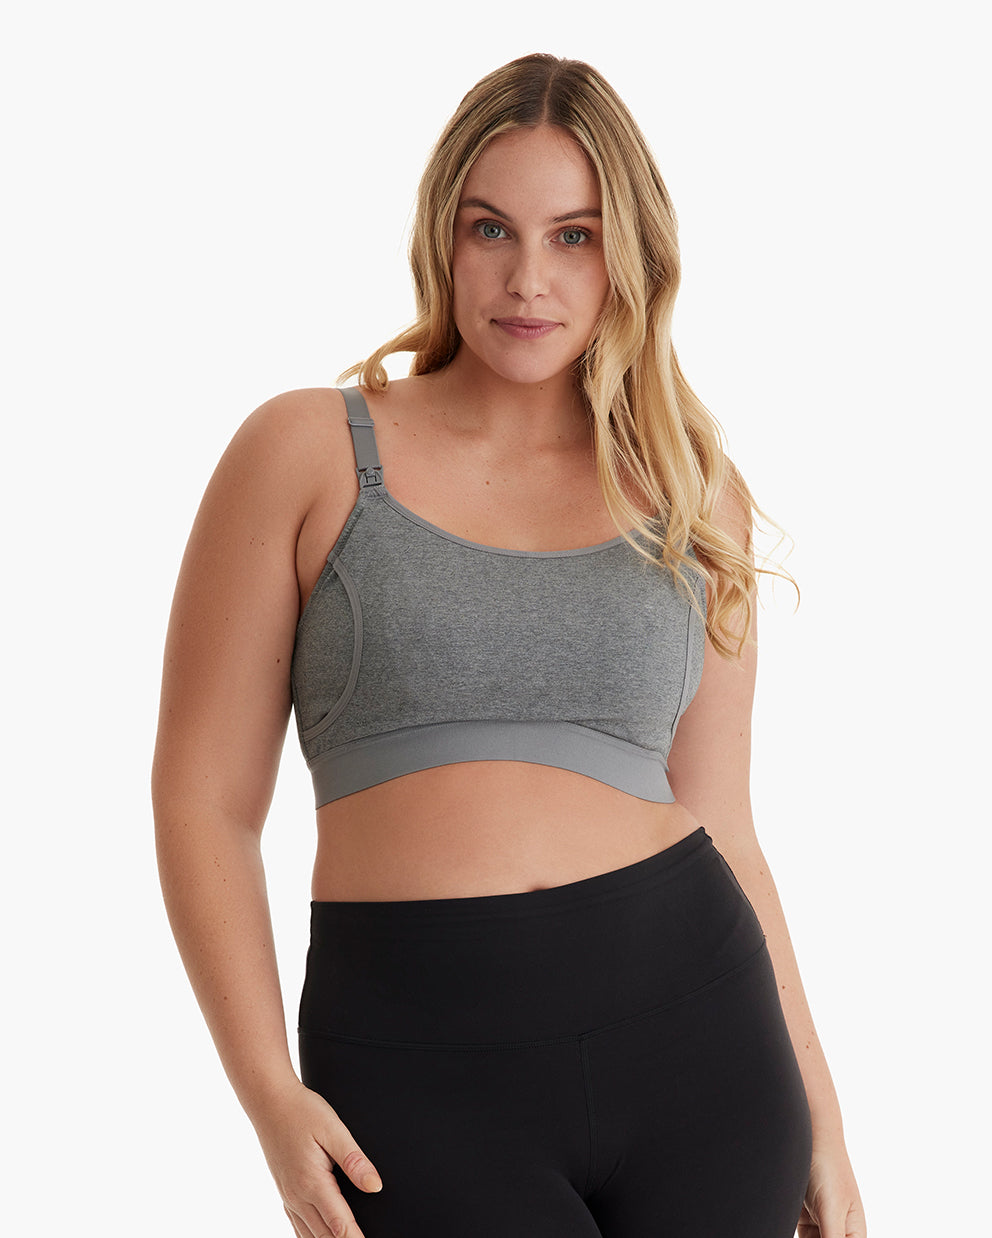 New recycled nylon athleisure nursing bras from Projectme - Underlines  Magazine